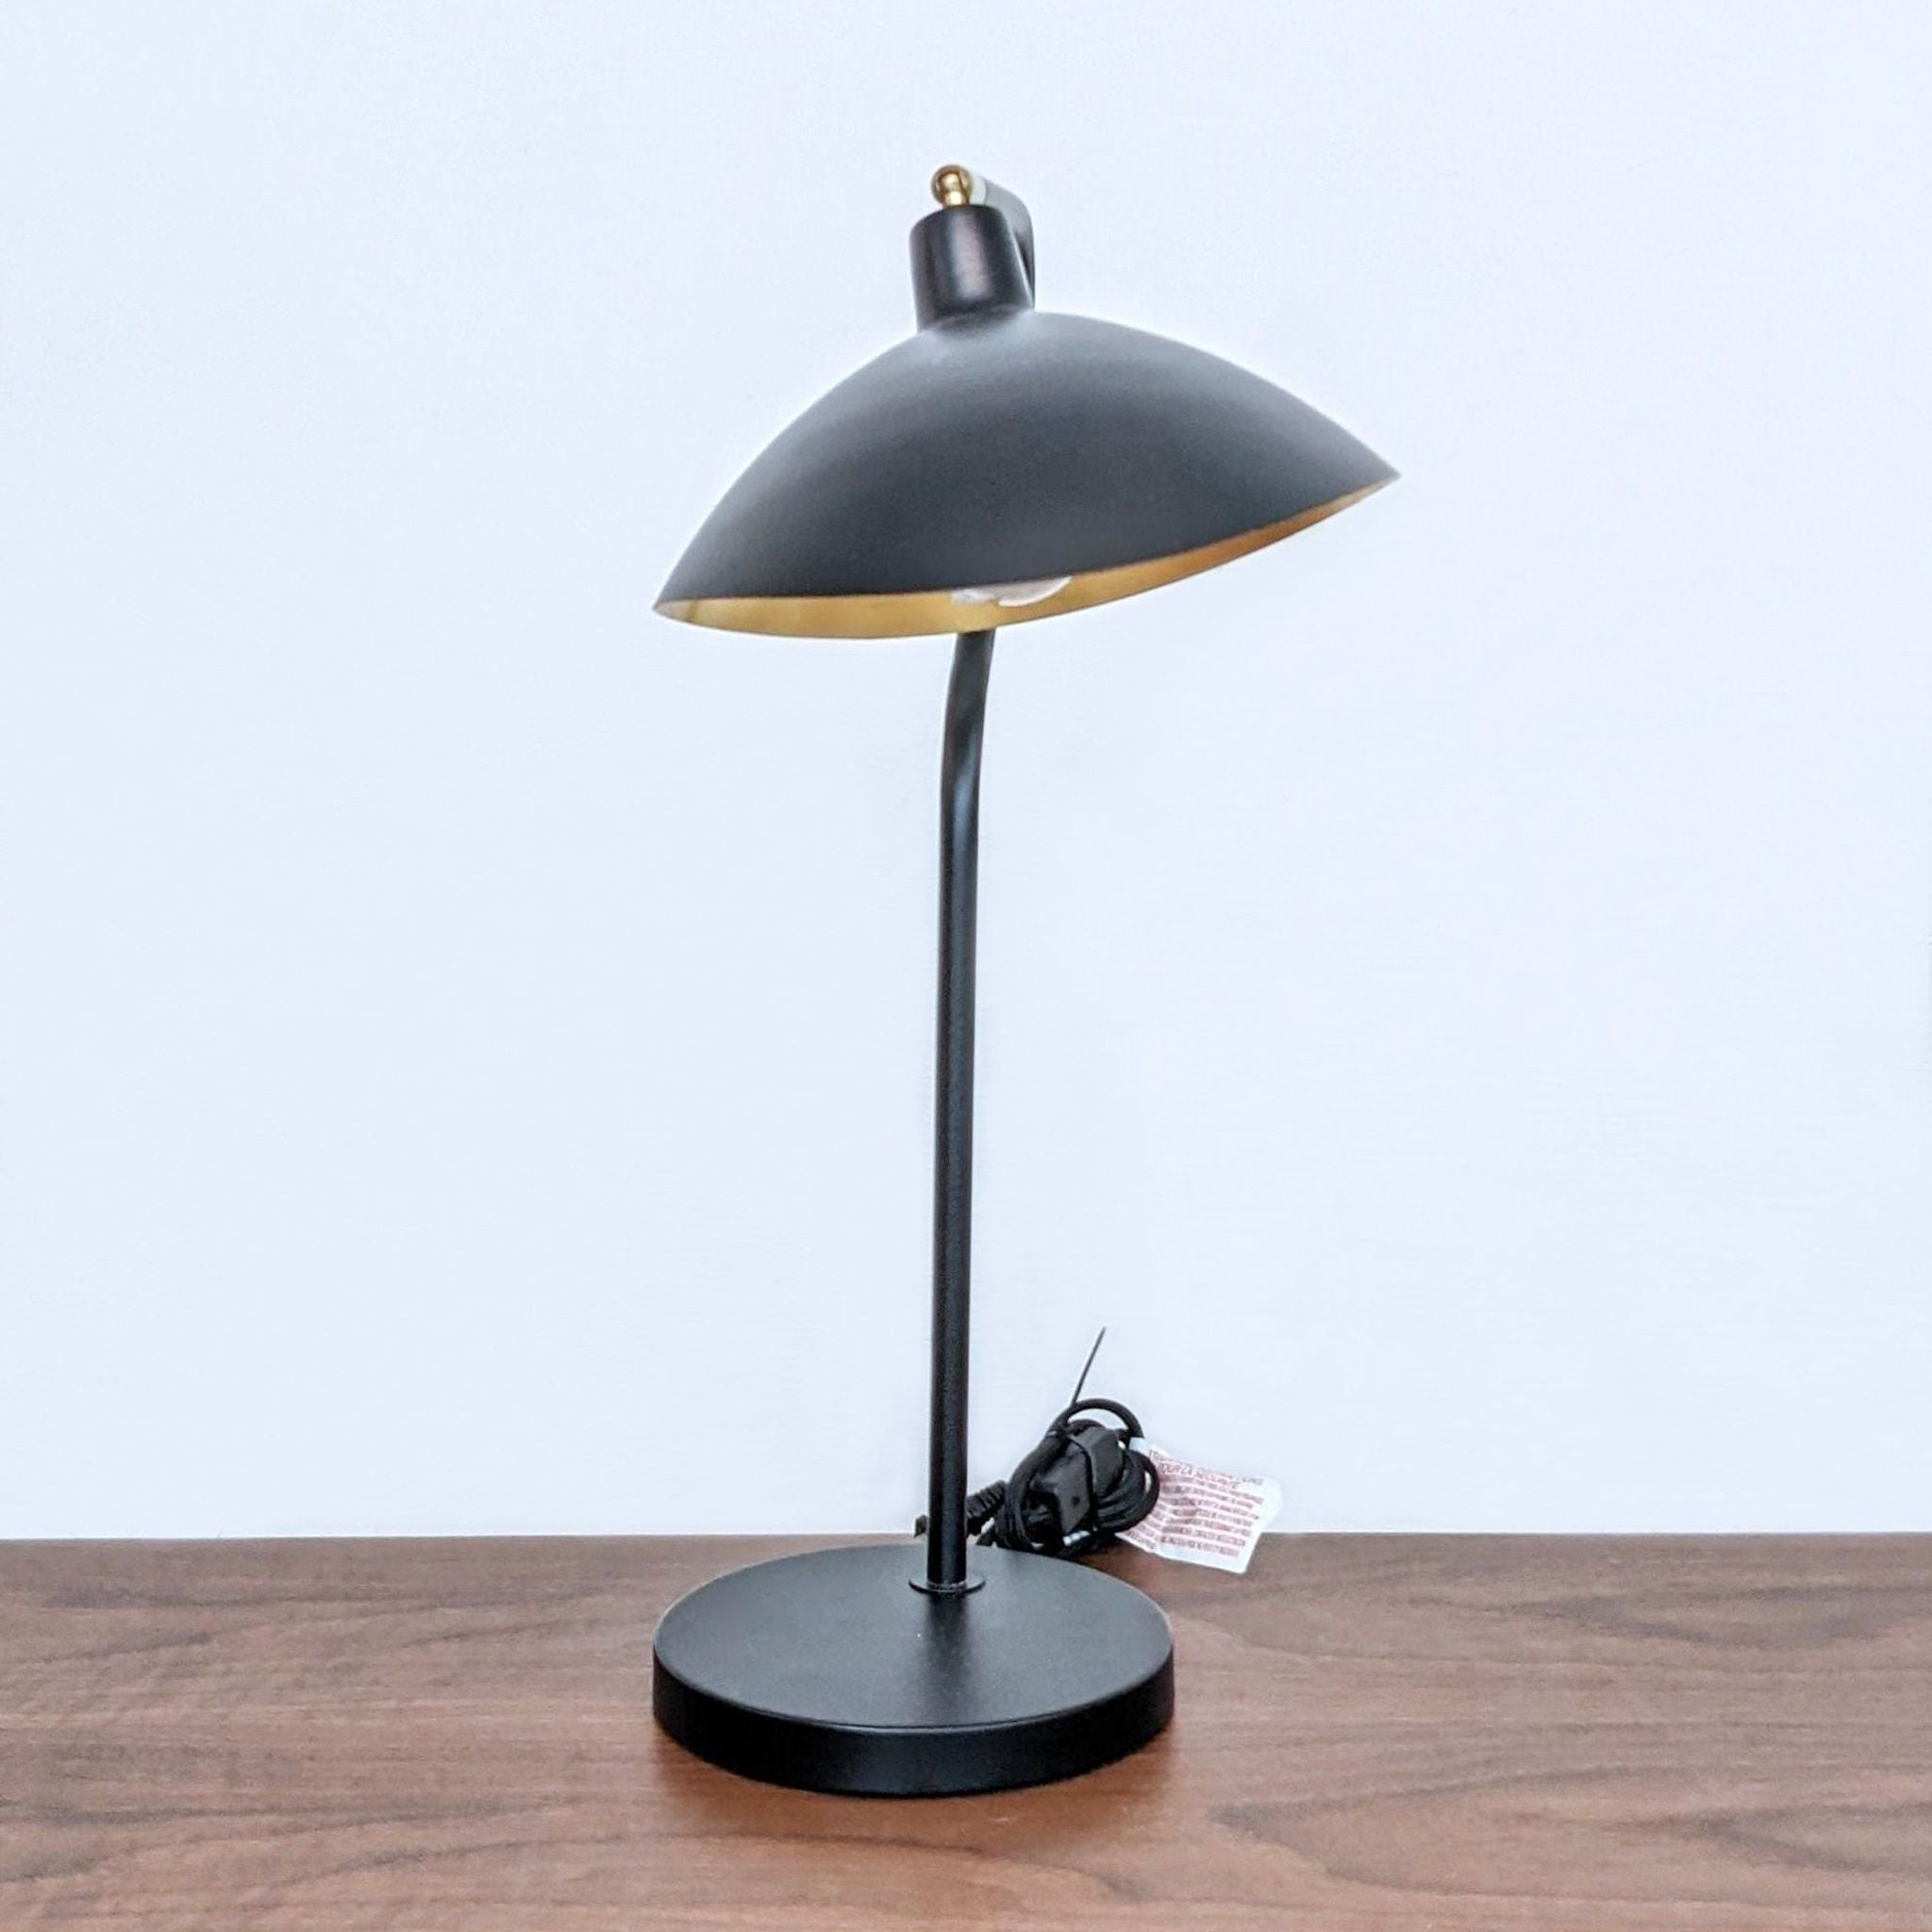 Safavieh black and gold desk lamp with a dome-shaped shade on a wooden table.